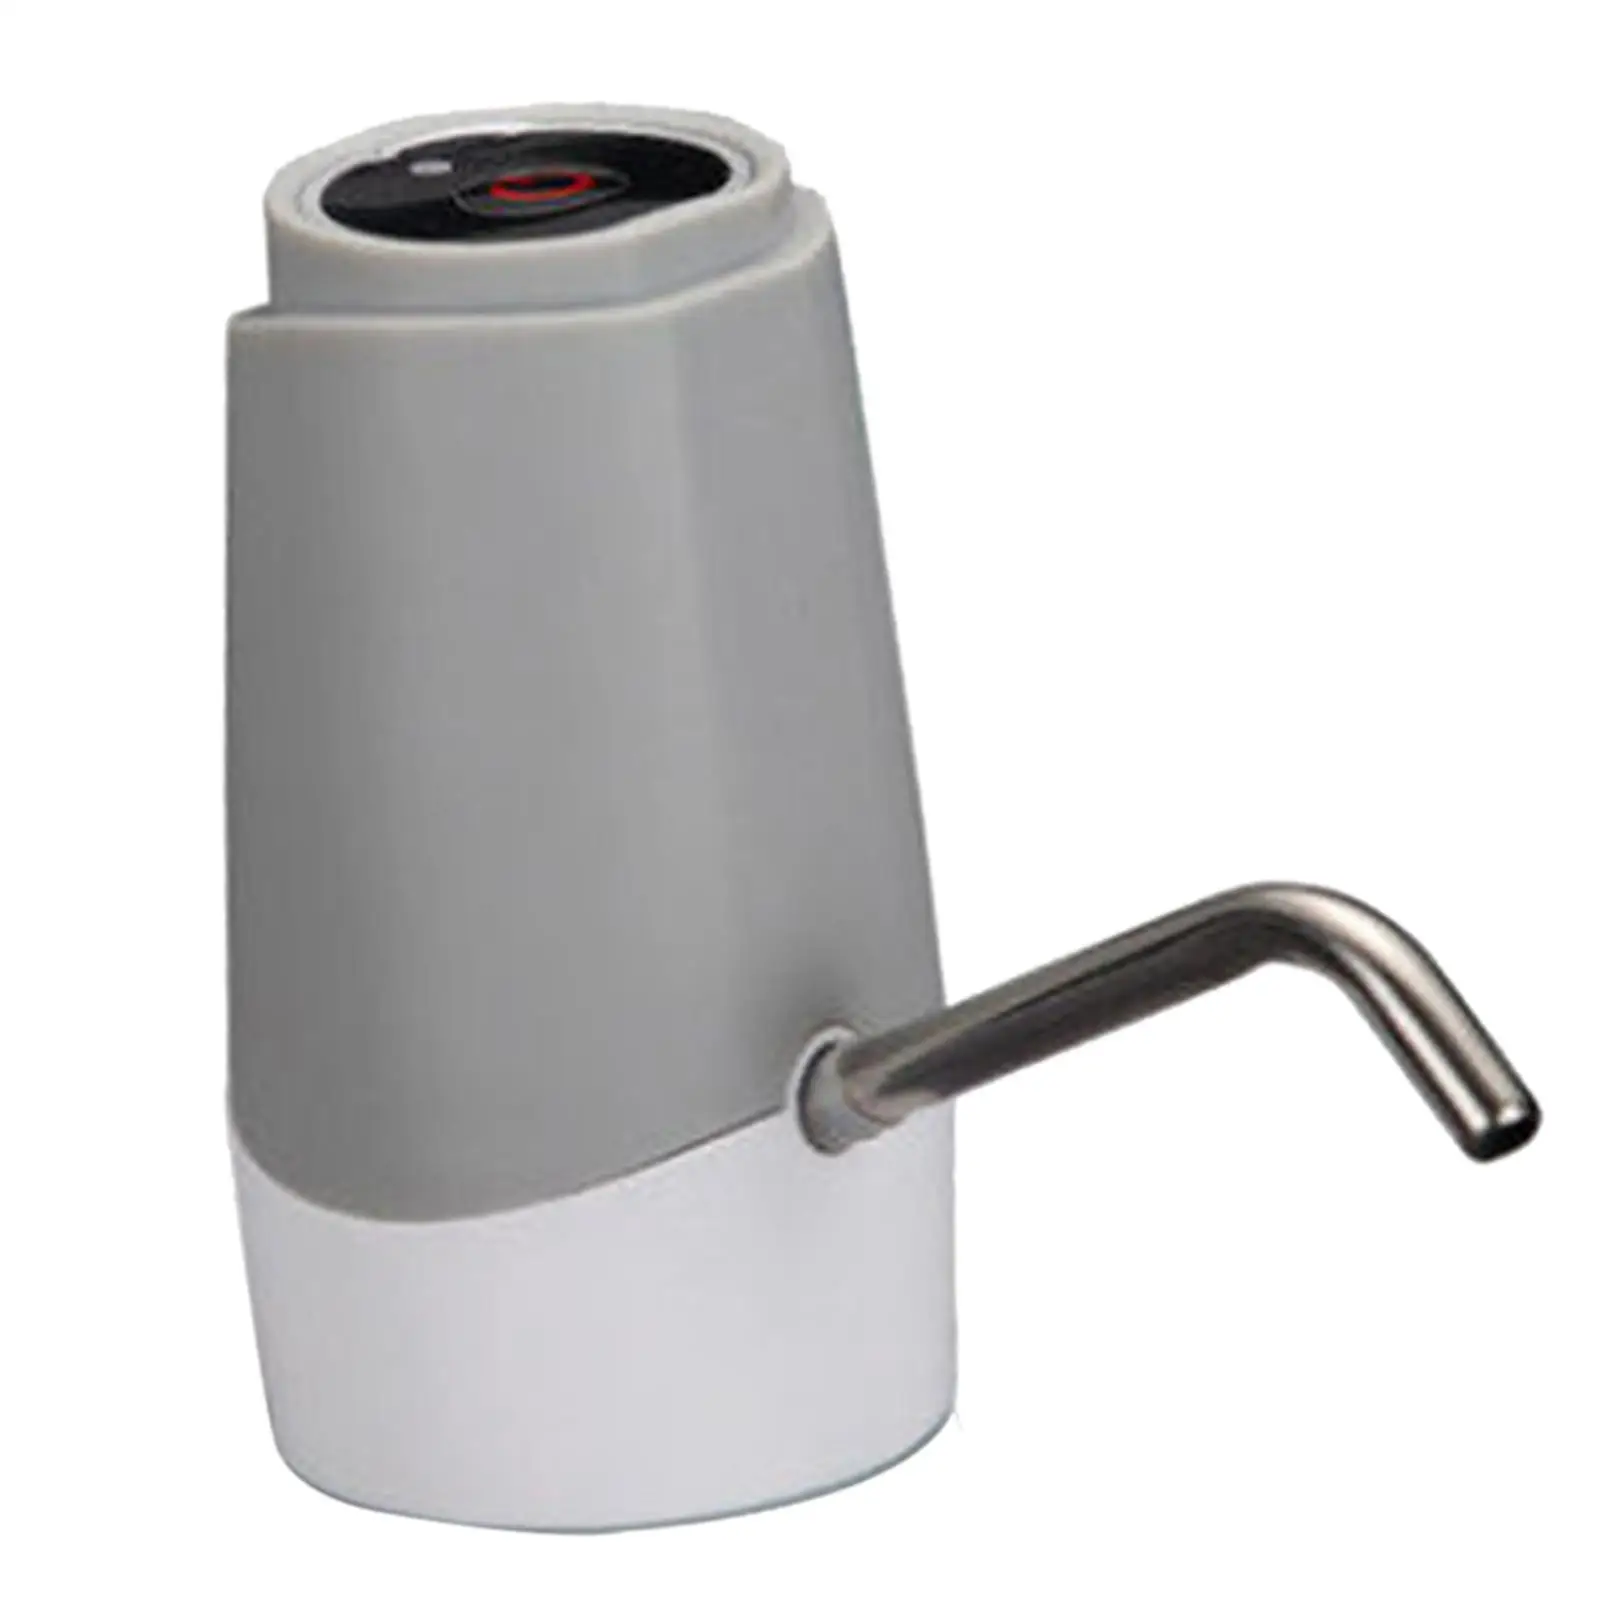 Automatic Water Dispenser, Portable Water Pump Electric pump Bottle Pump for Camping, Picnic, Office, Home, Hiking,